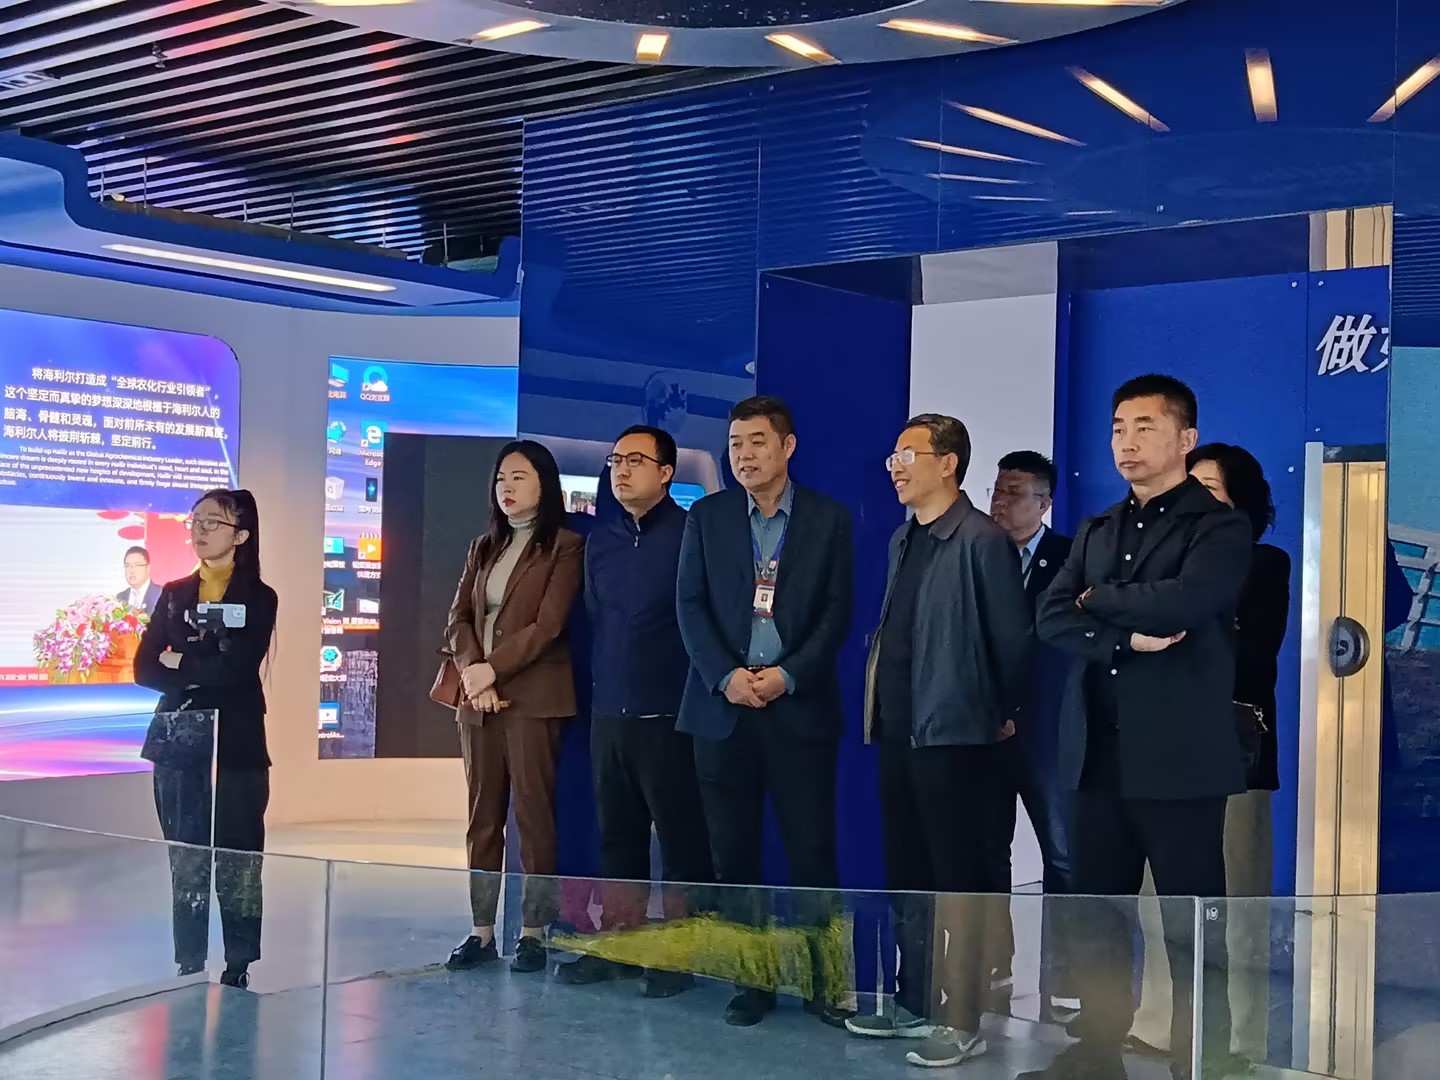  The young entrepreneurs of Chengyang District came to Hailier to visit and exchange learning